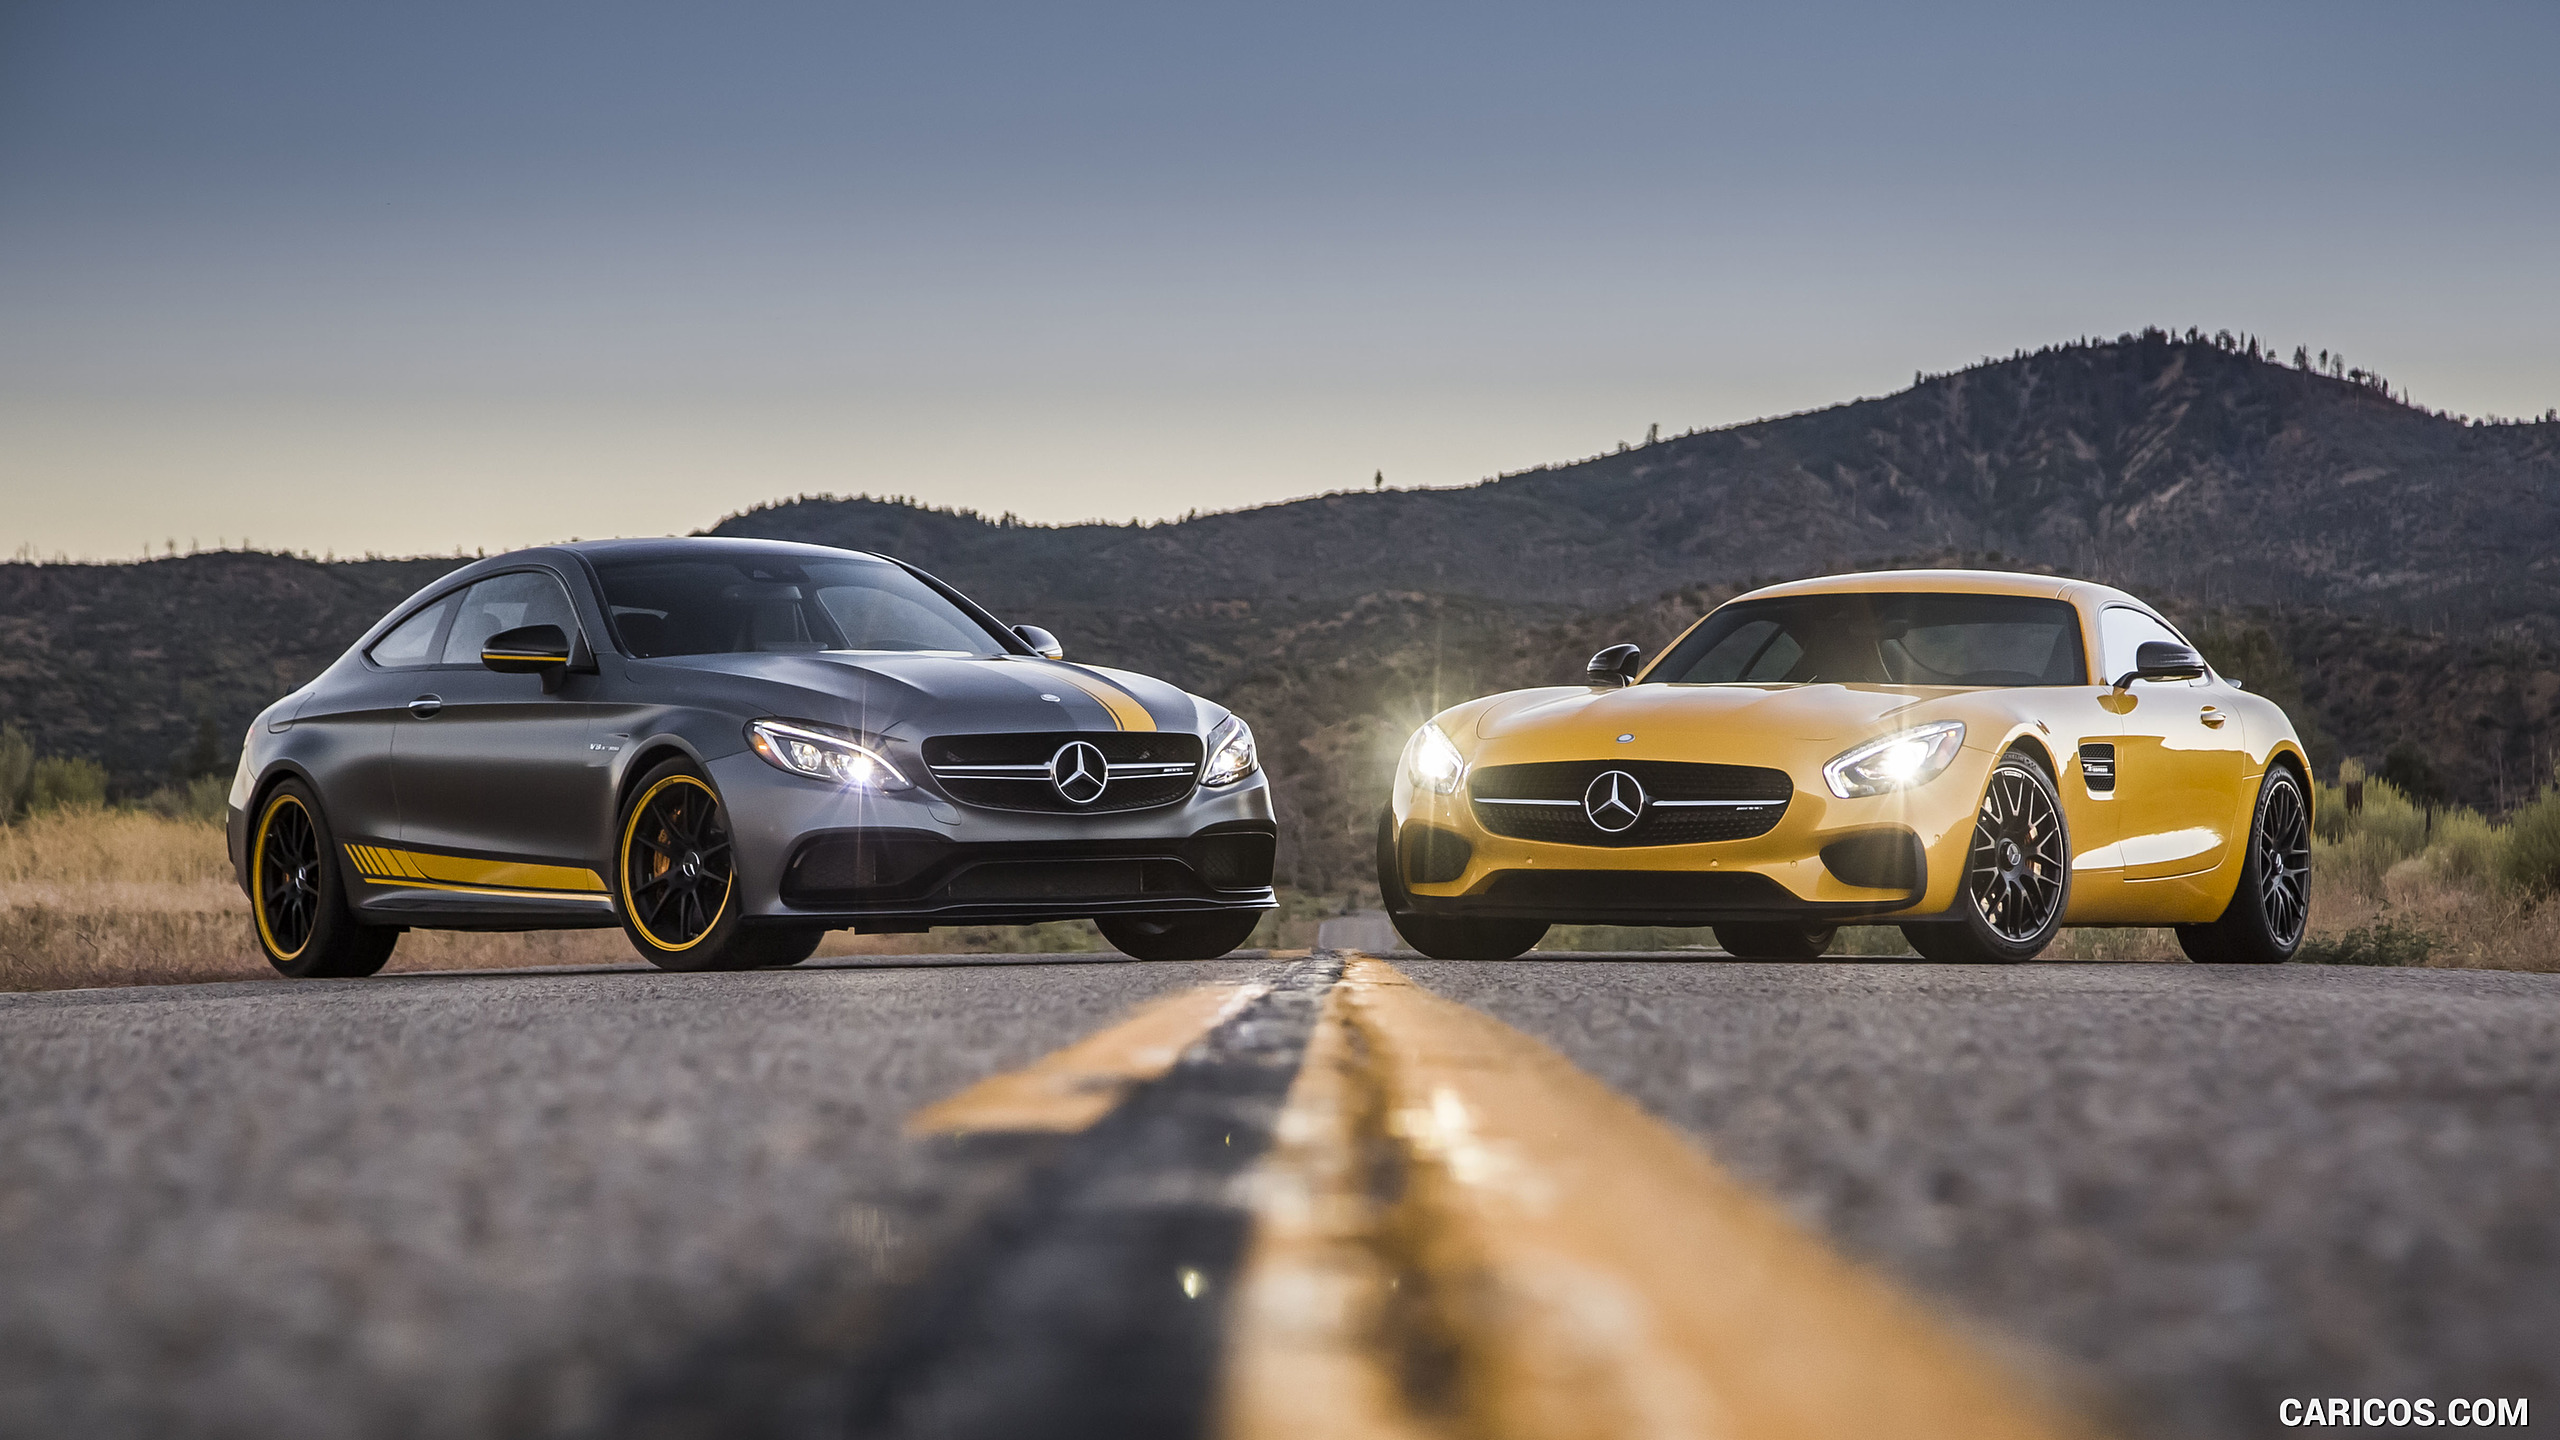 2017 Mercedes-AMG C63 S Coupe Edition One (US-Spec) and 2017 Mercedes-AMG GT S Coupe, #85 of 86